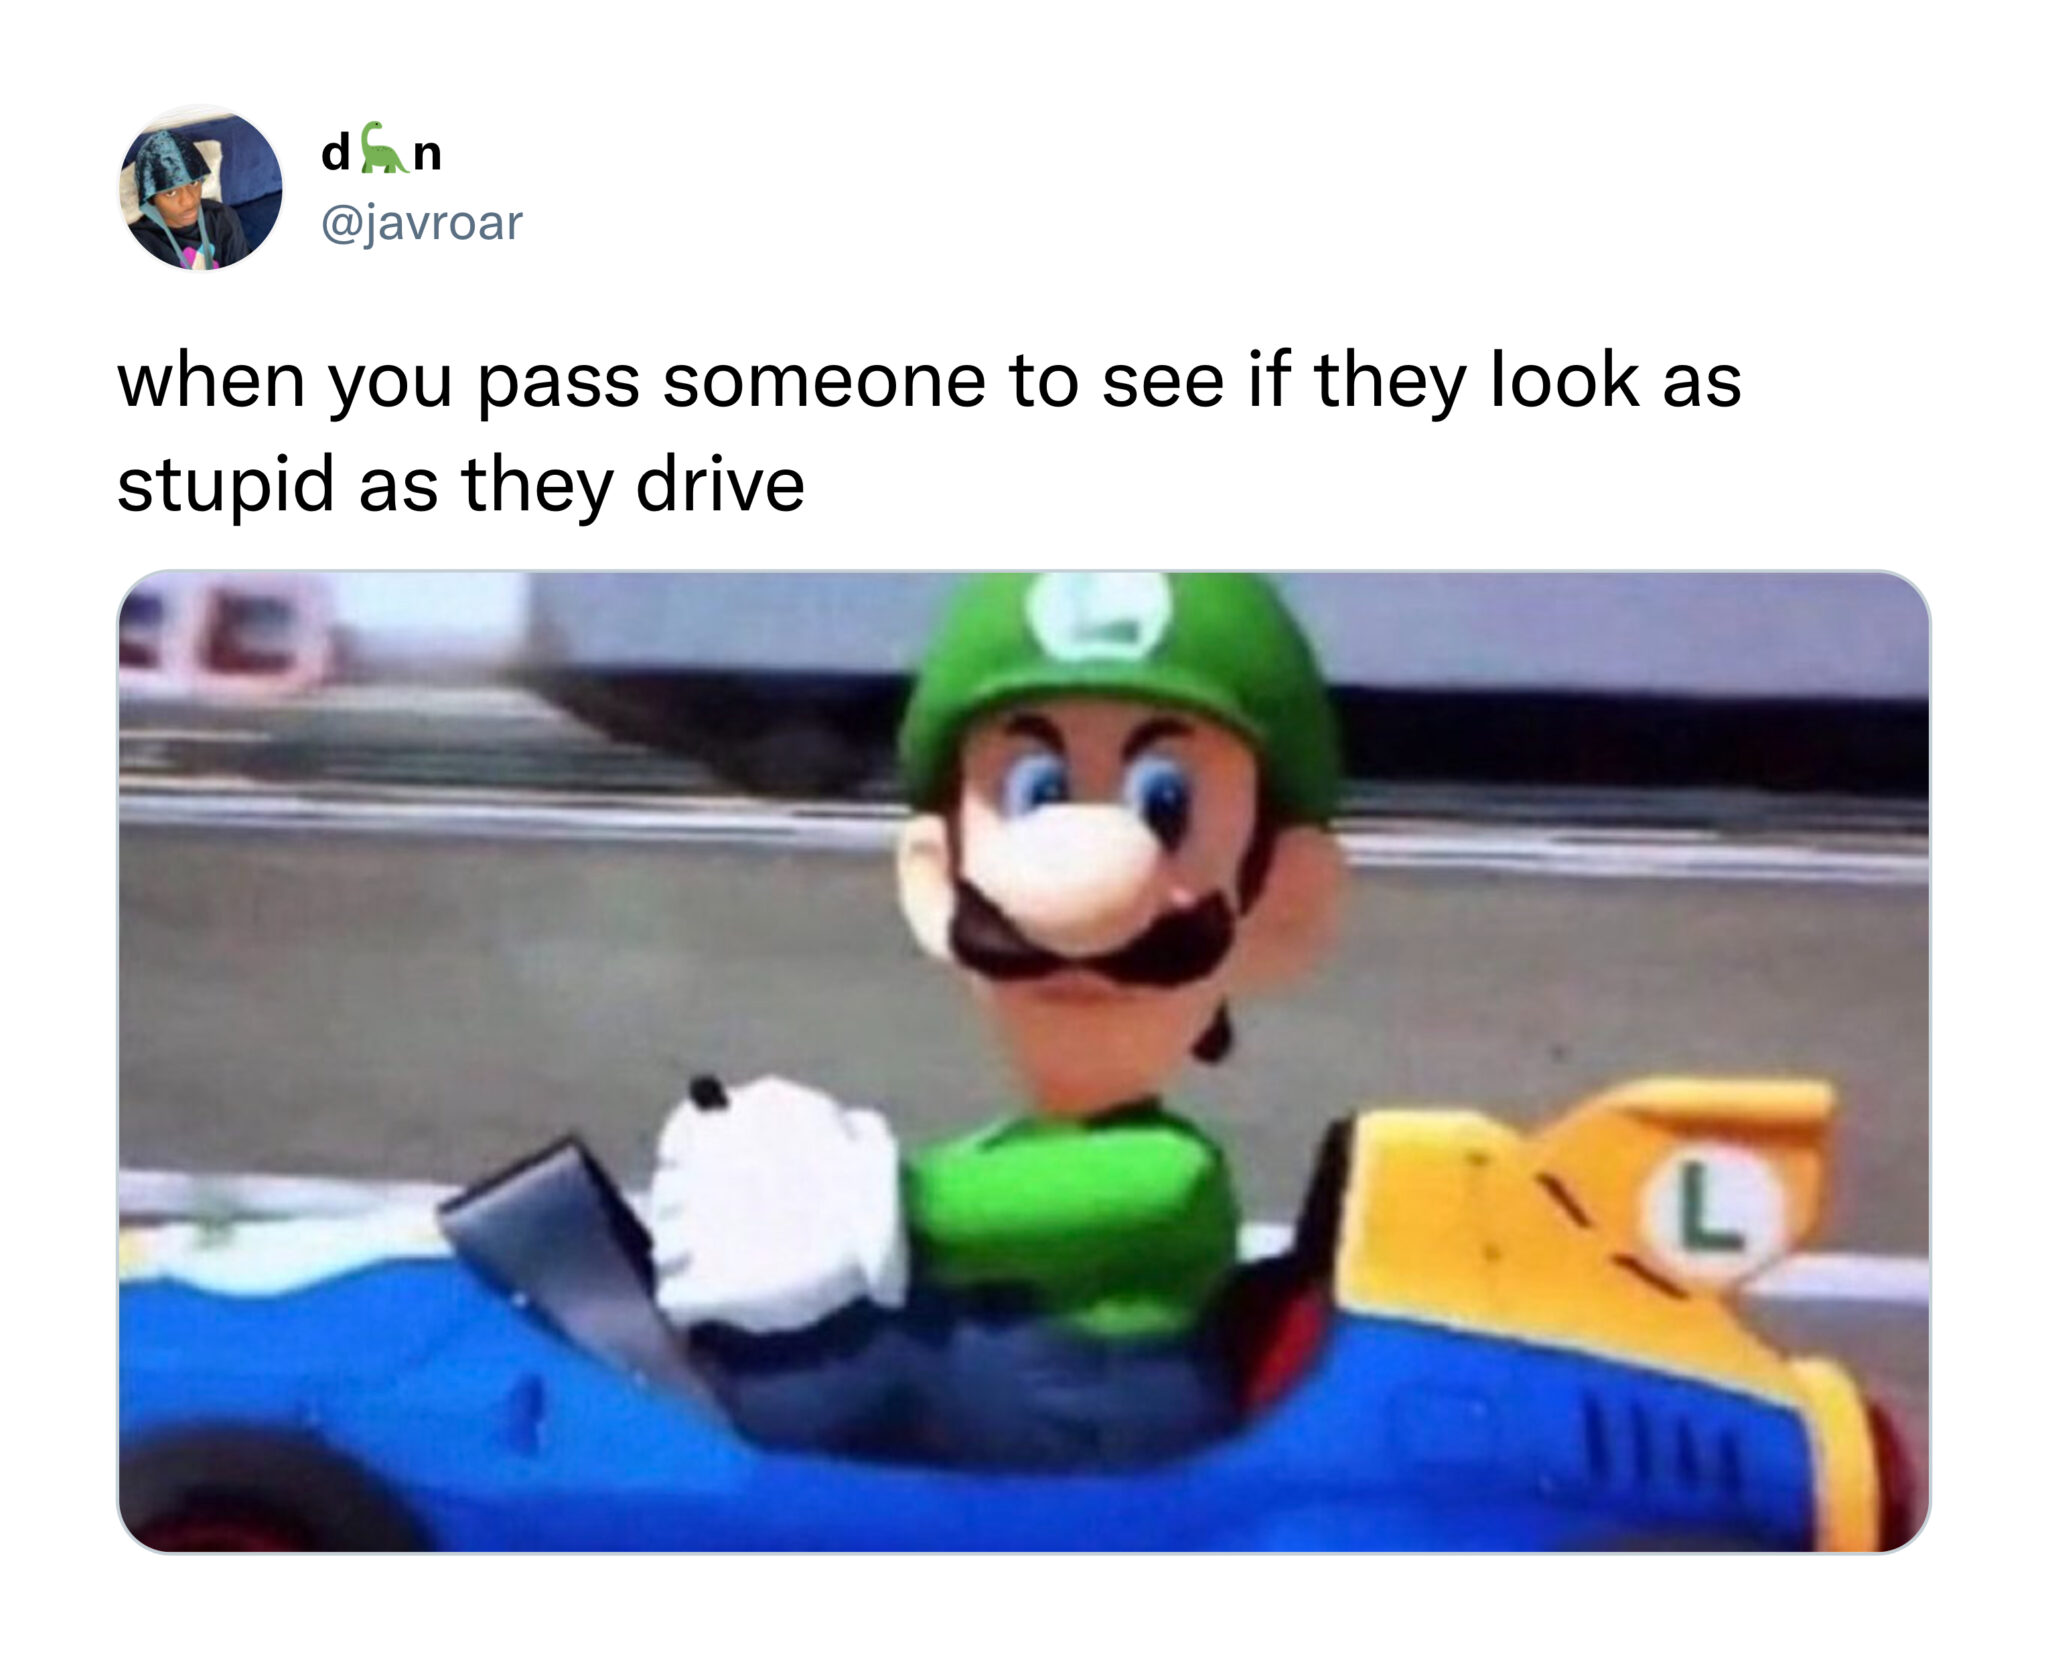 funny tweets and posts on twitter -  luigi death stare - dn when you pass someone to see if they look as stupid as they drive L